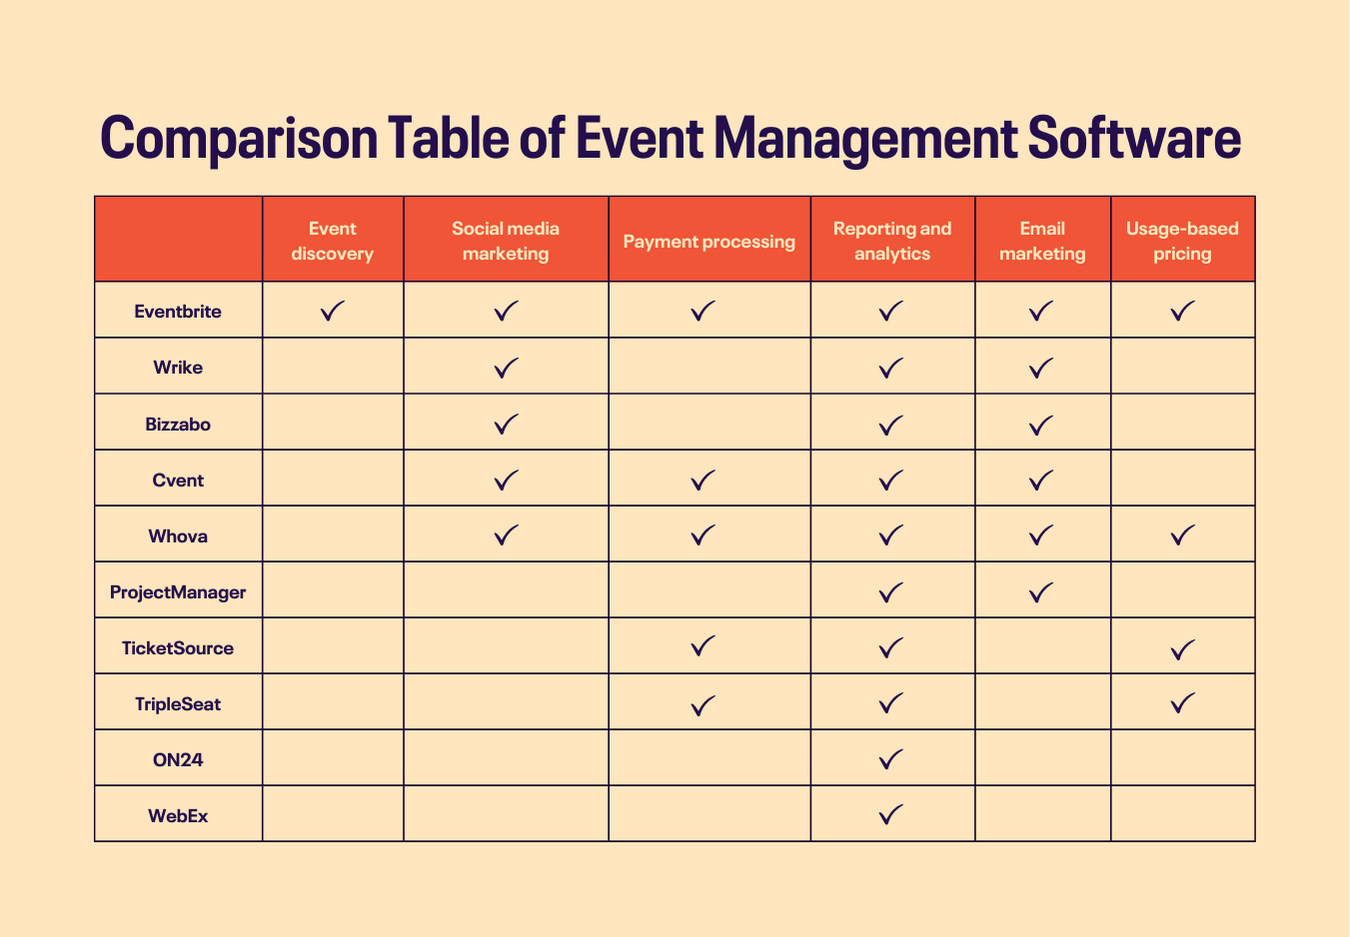 Table comparing event management software